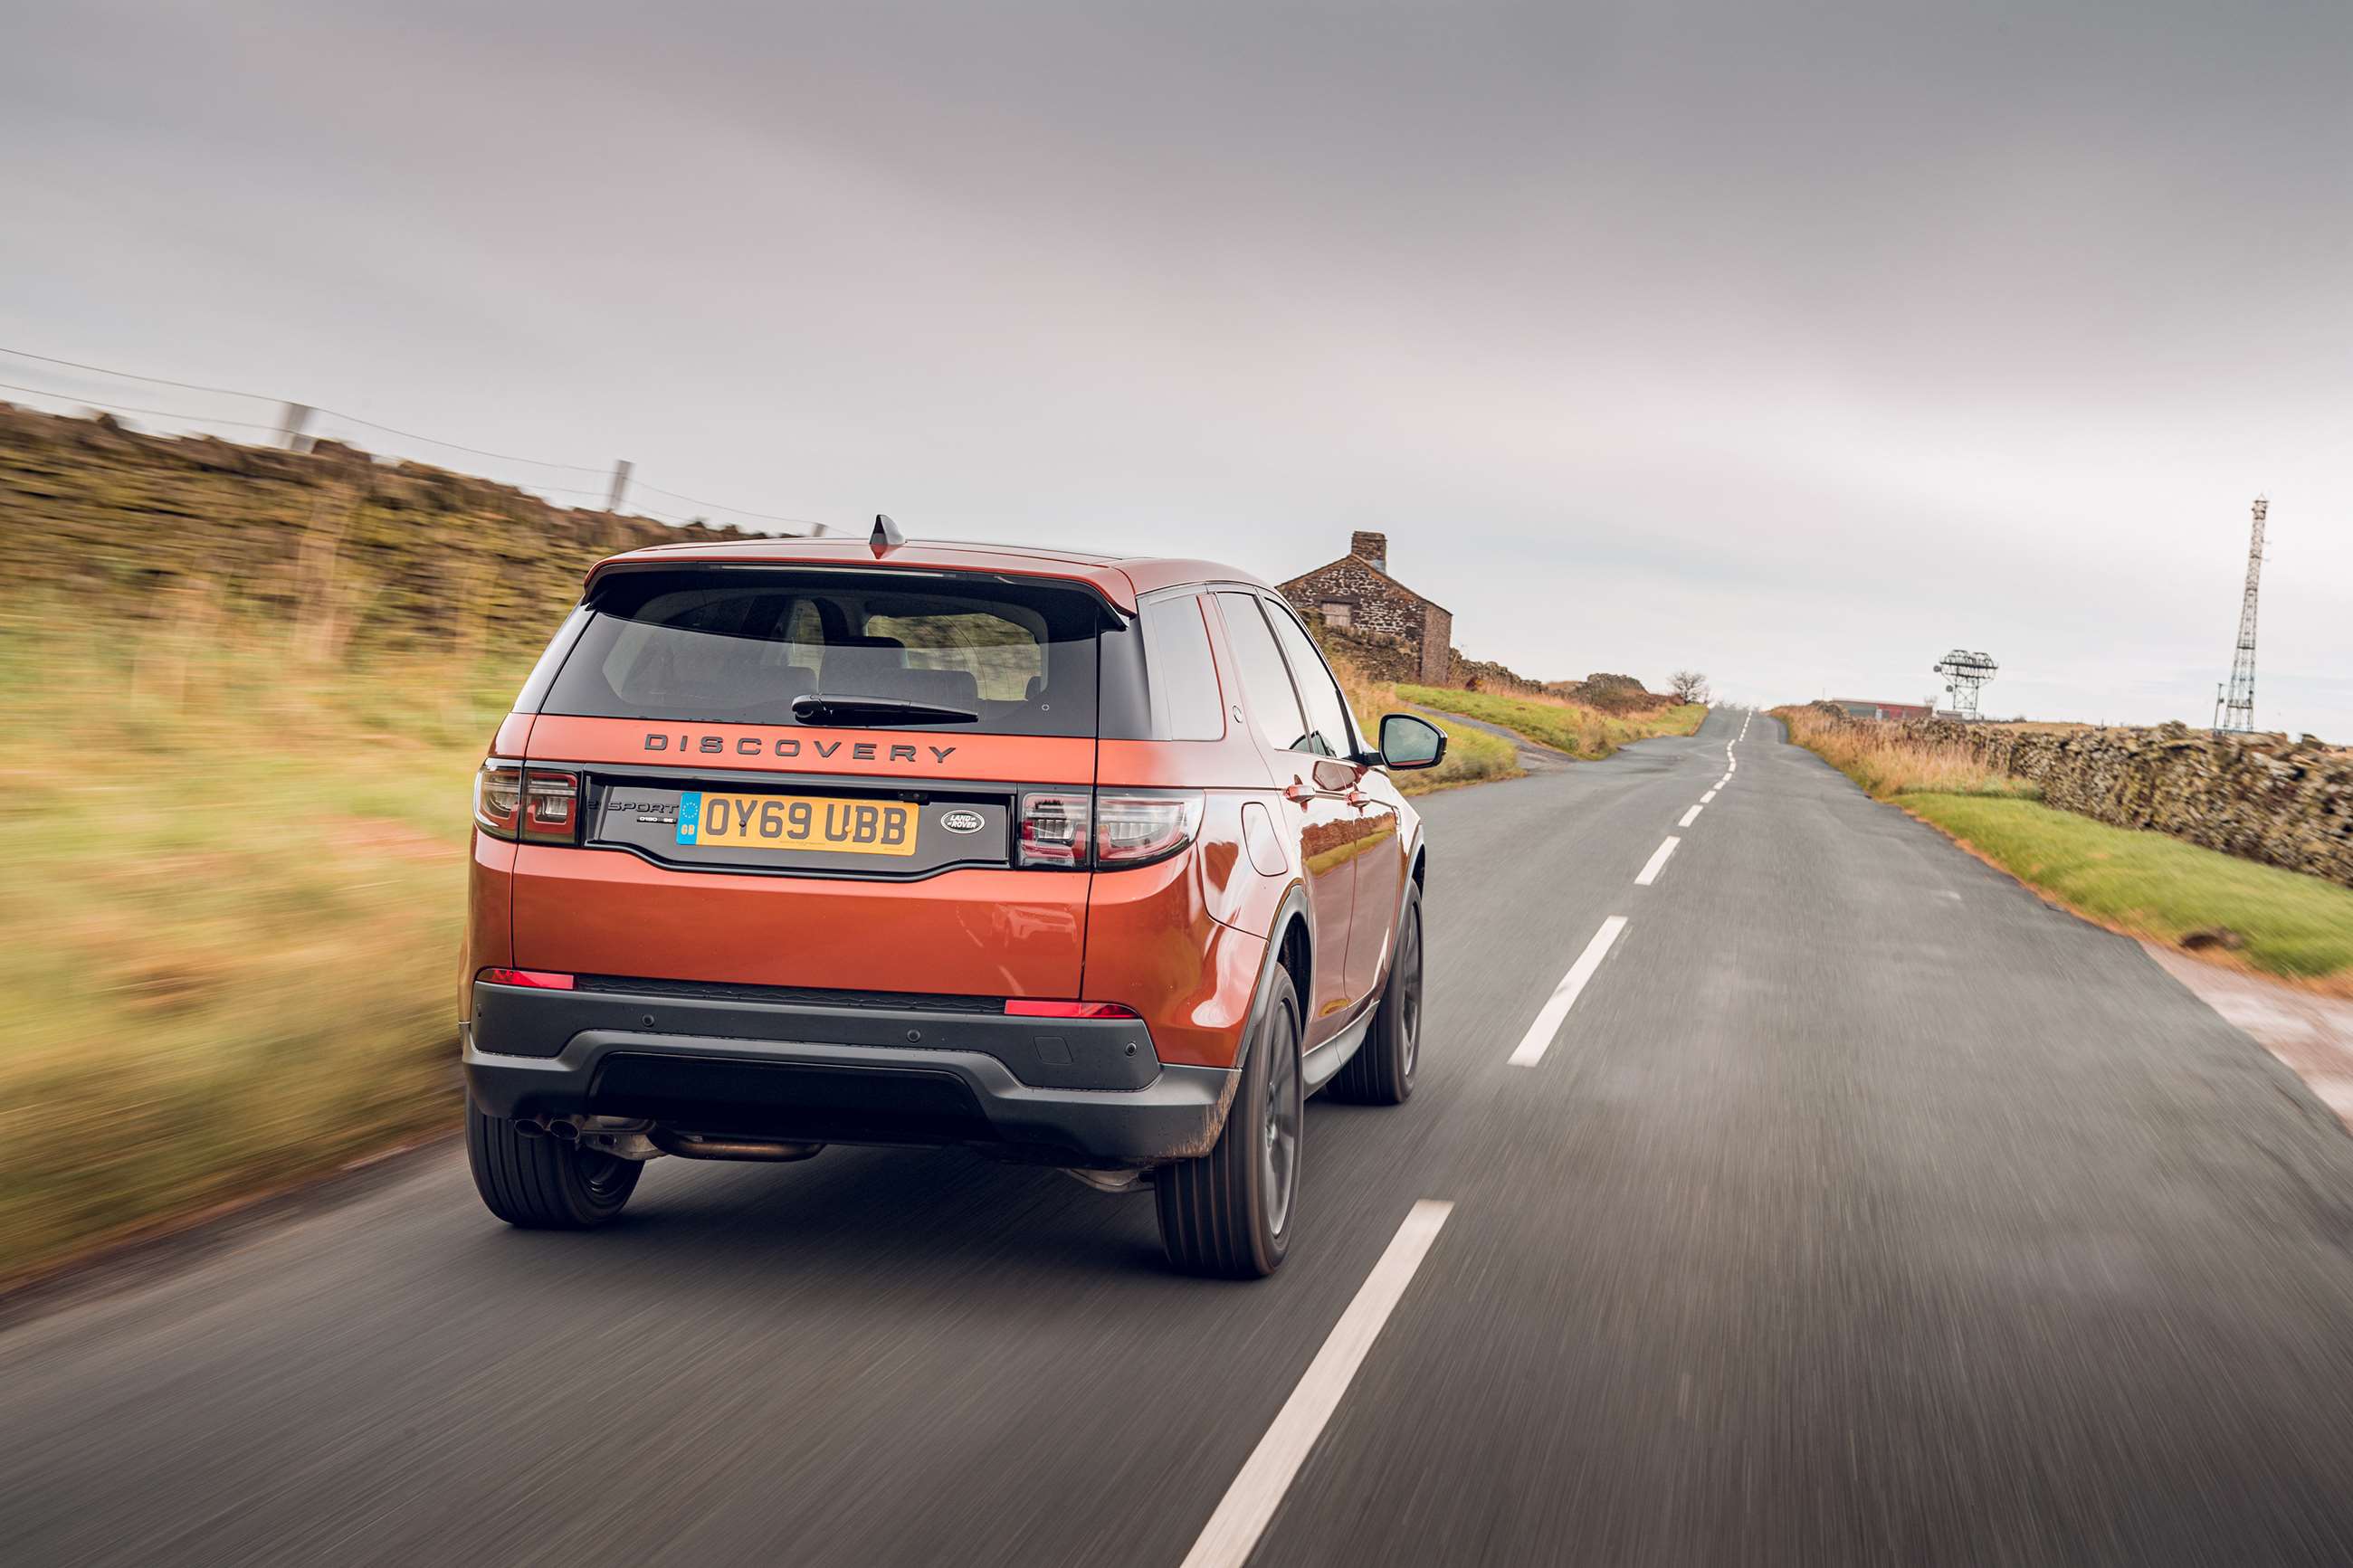 2020-land-rover-discovery-sport05111902.jpg